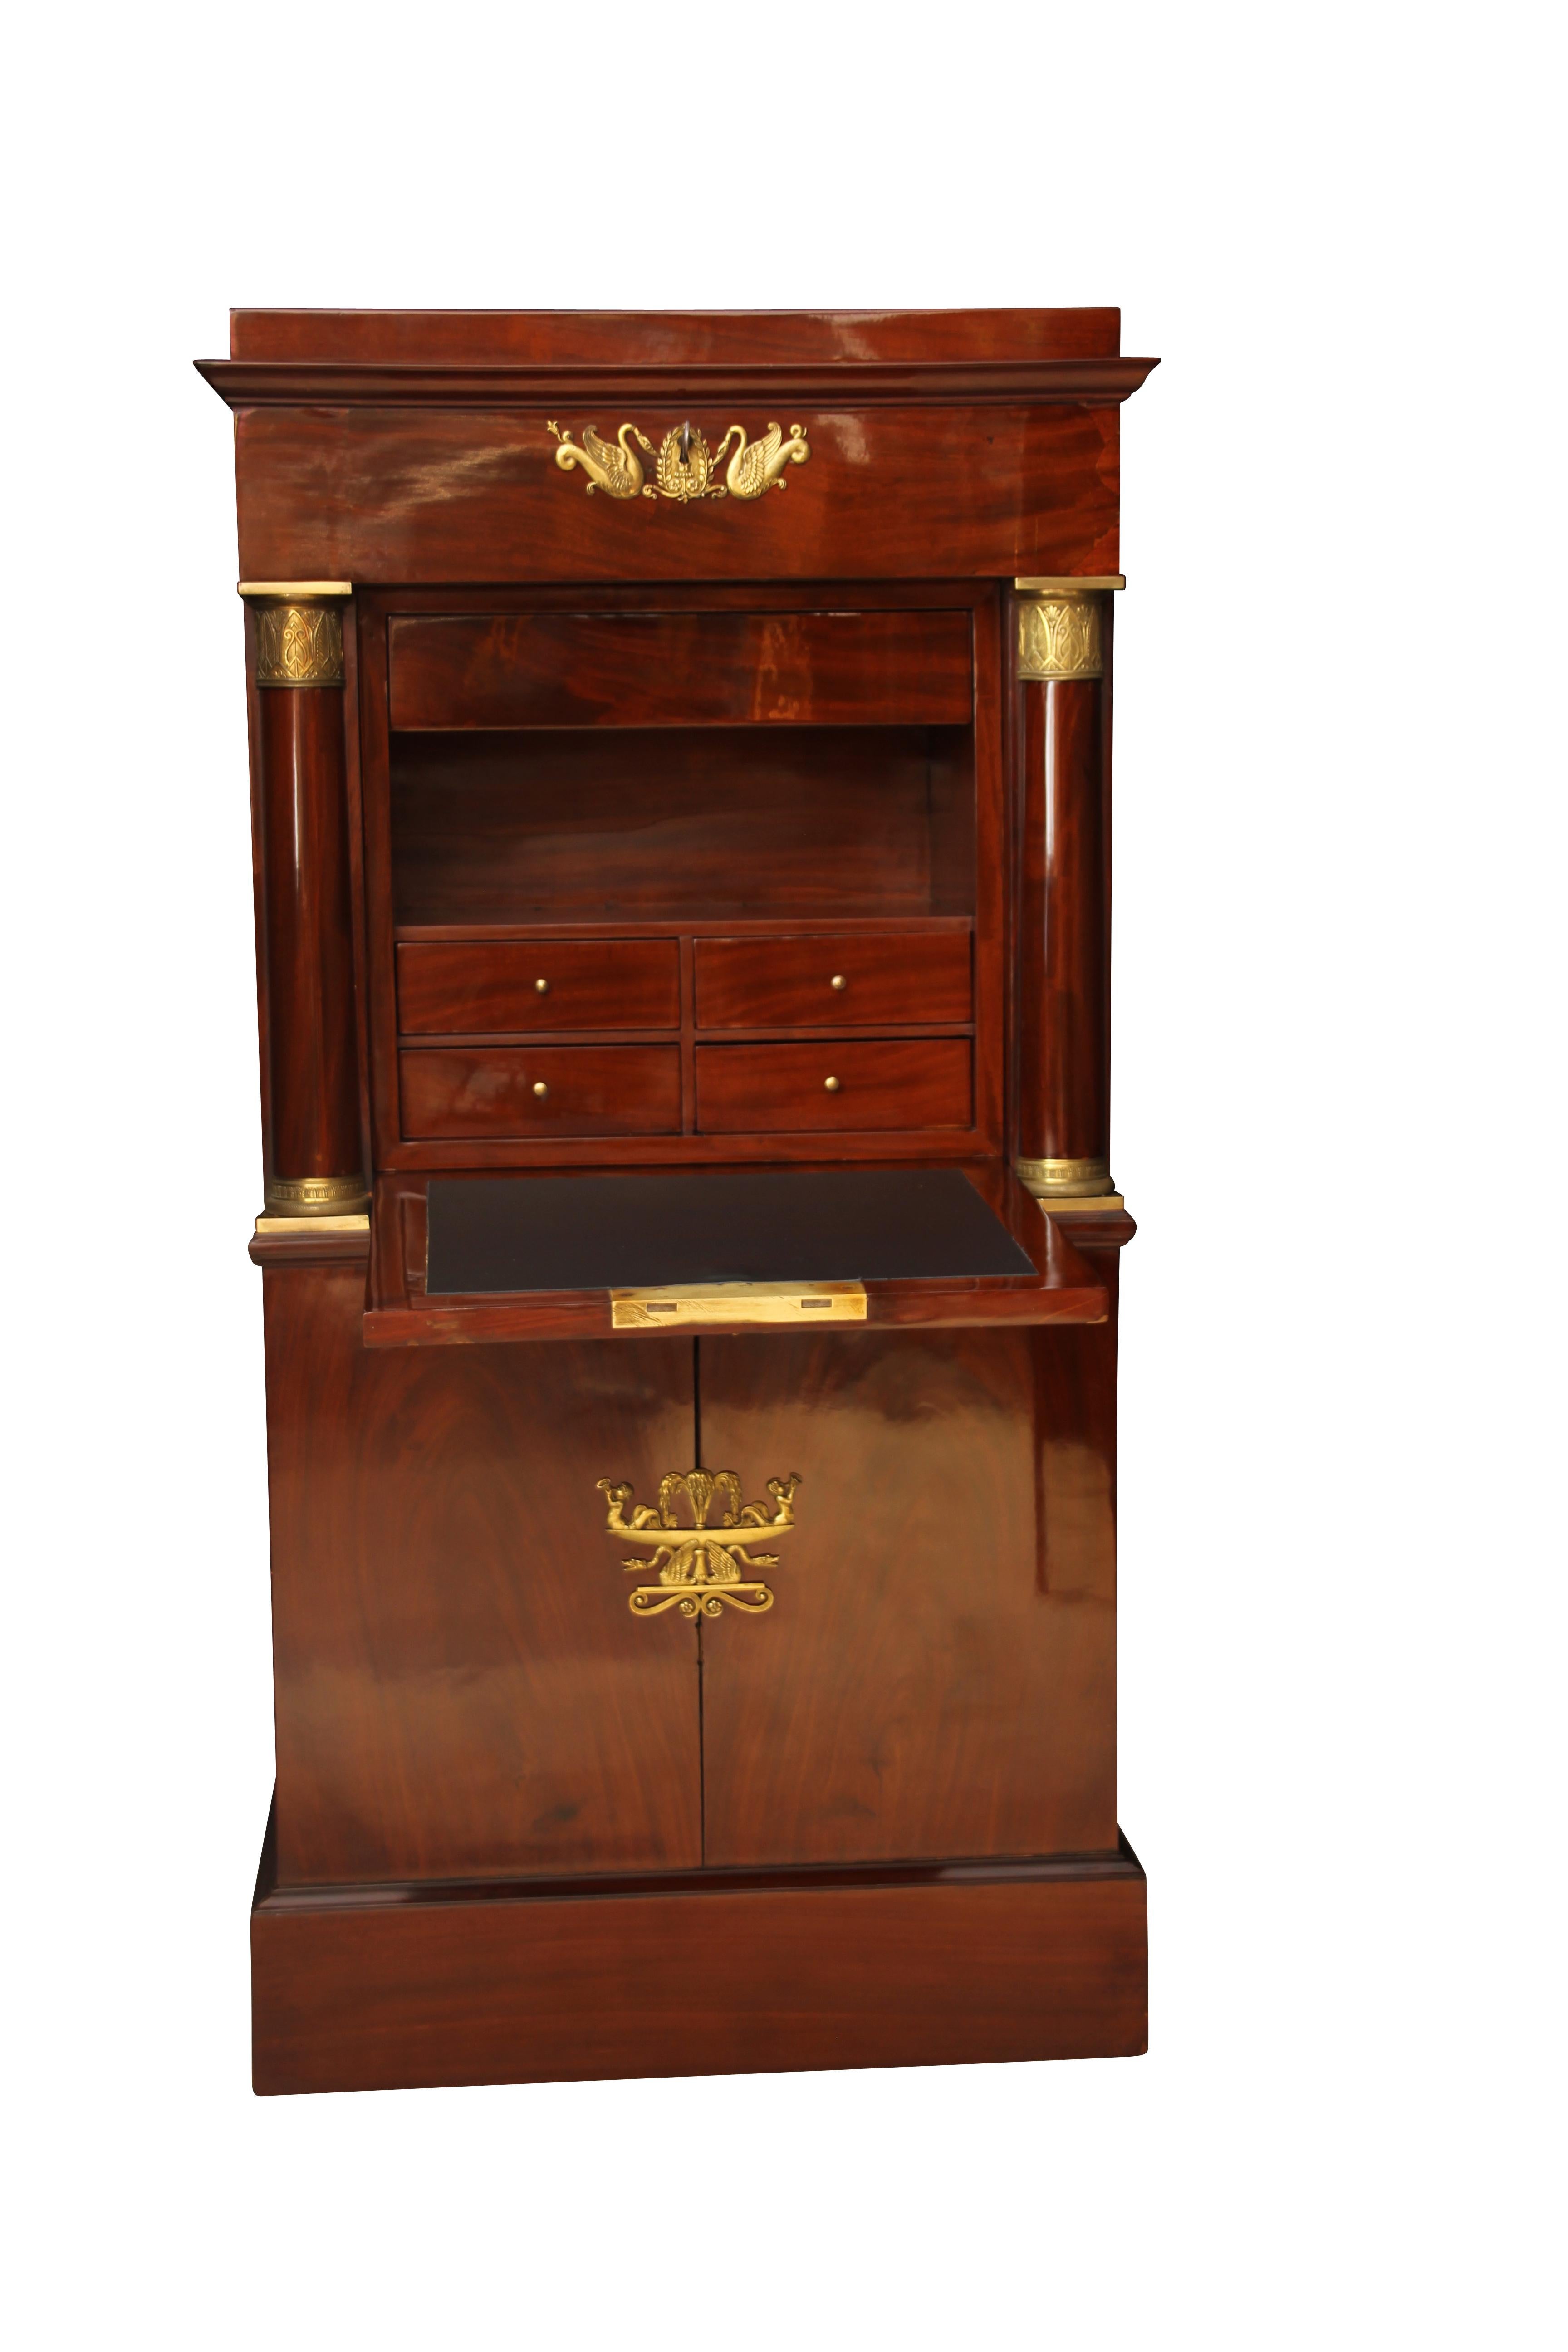 French Rare Empire Secretaire with Side Drawers, Mahogany, Bronzes, France circa 1810.